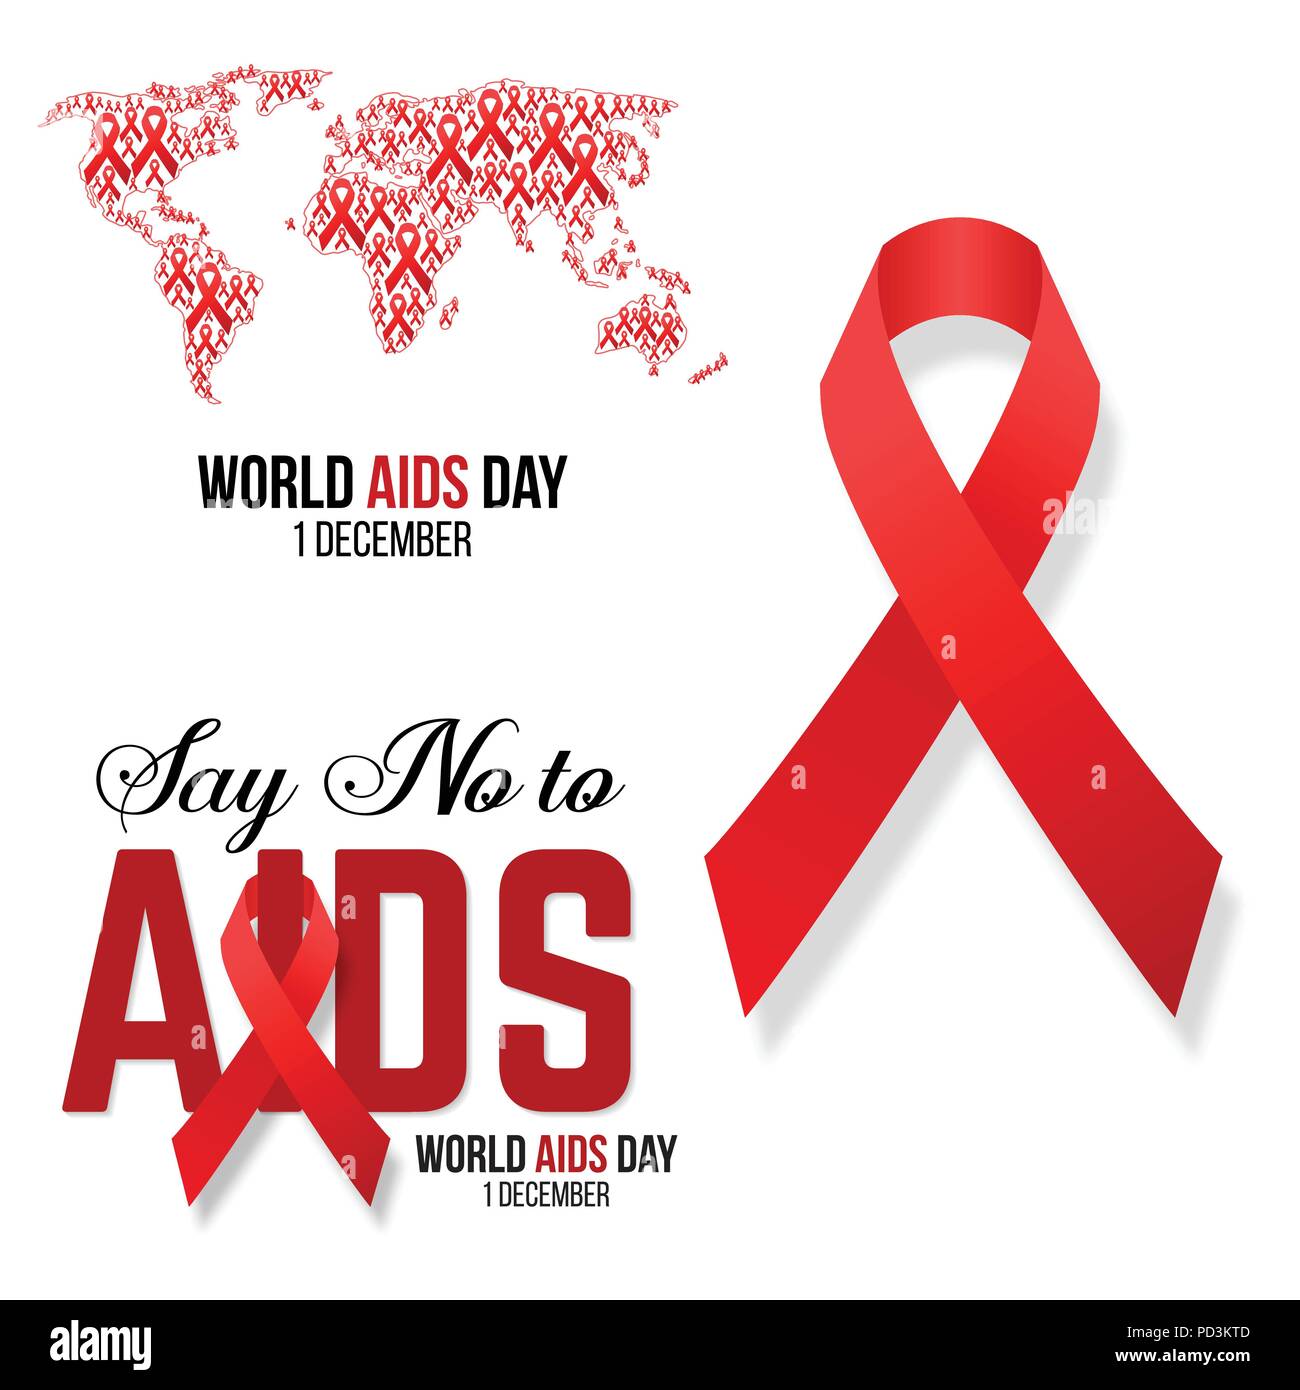 Vector illustration of hiv,aids awareness background isolated on white. World Aids Day concept. 1 December. Stock Vector